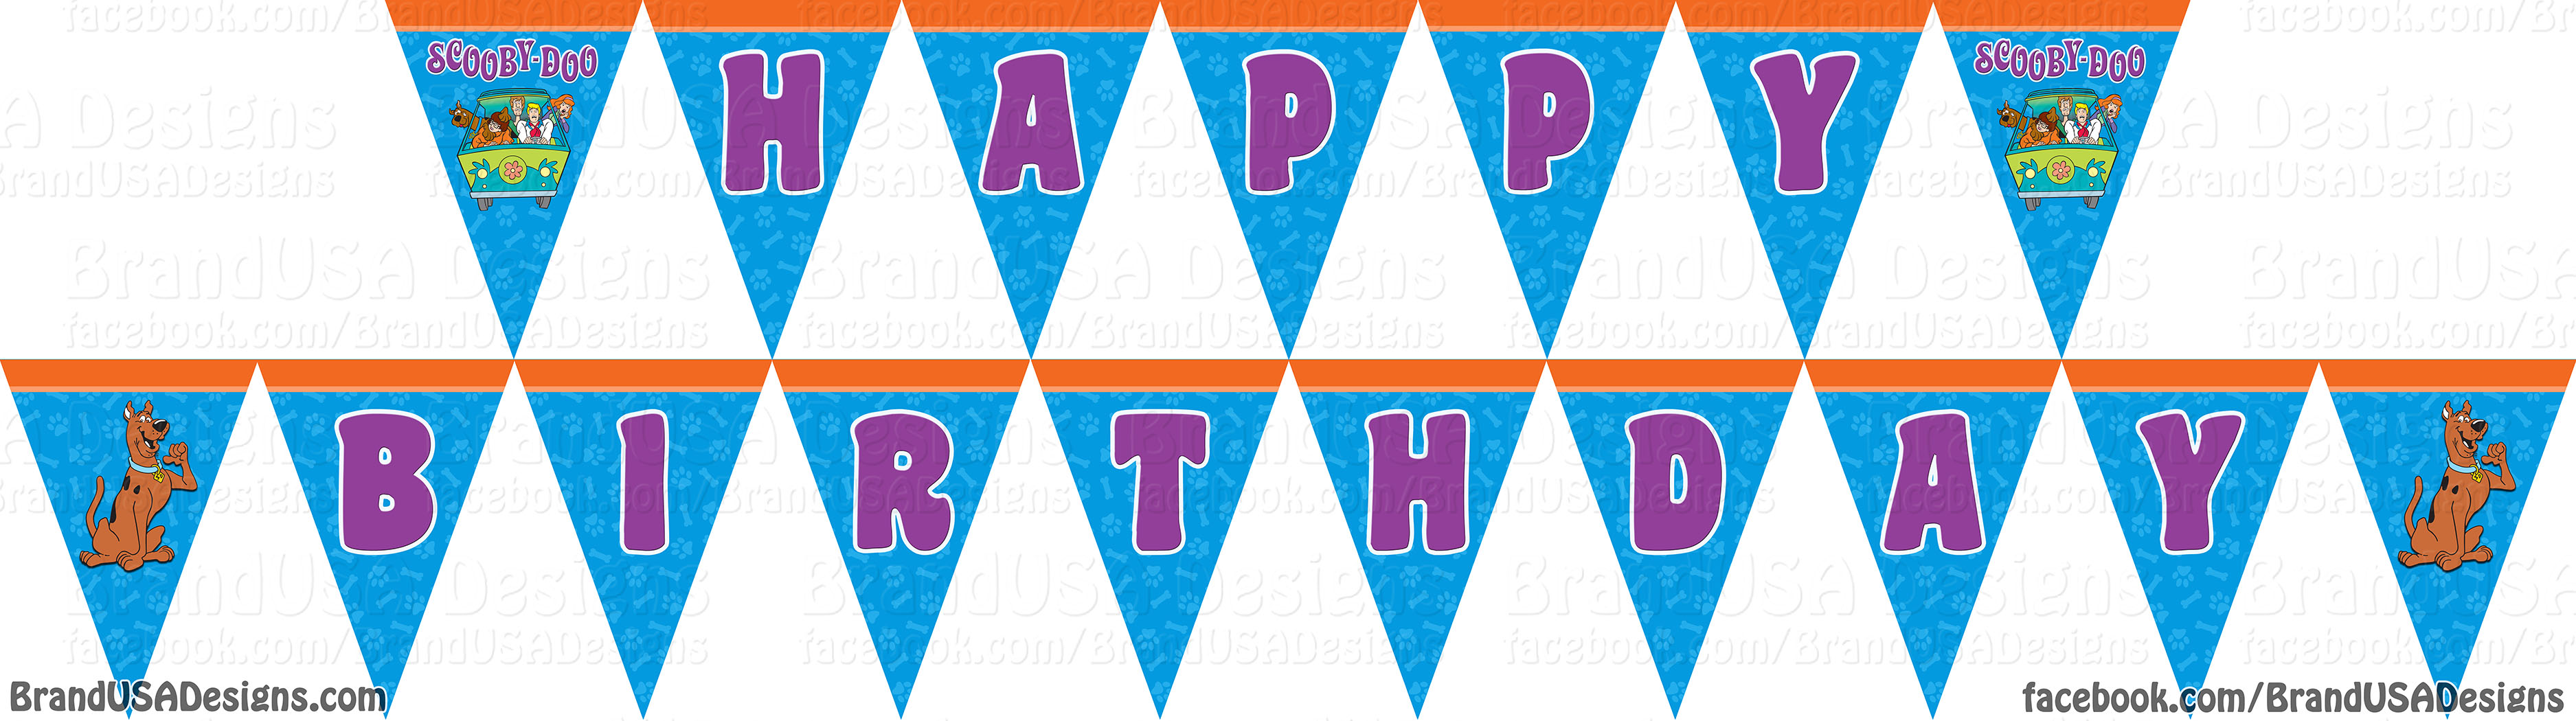 Happy Birthday Banner Clip Art   Clipart Panda   Free Clipart Images